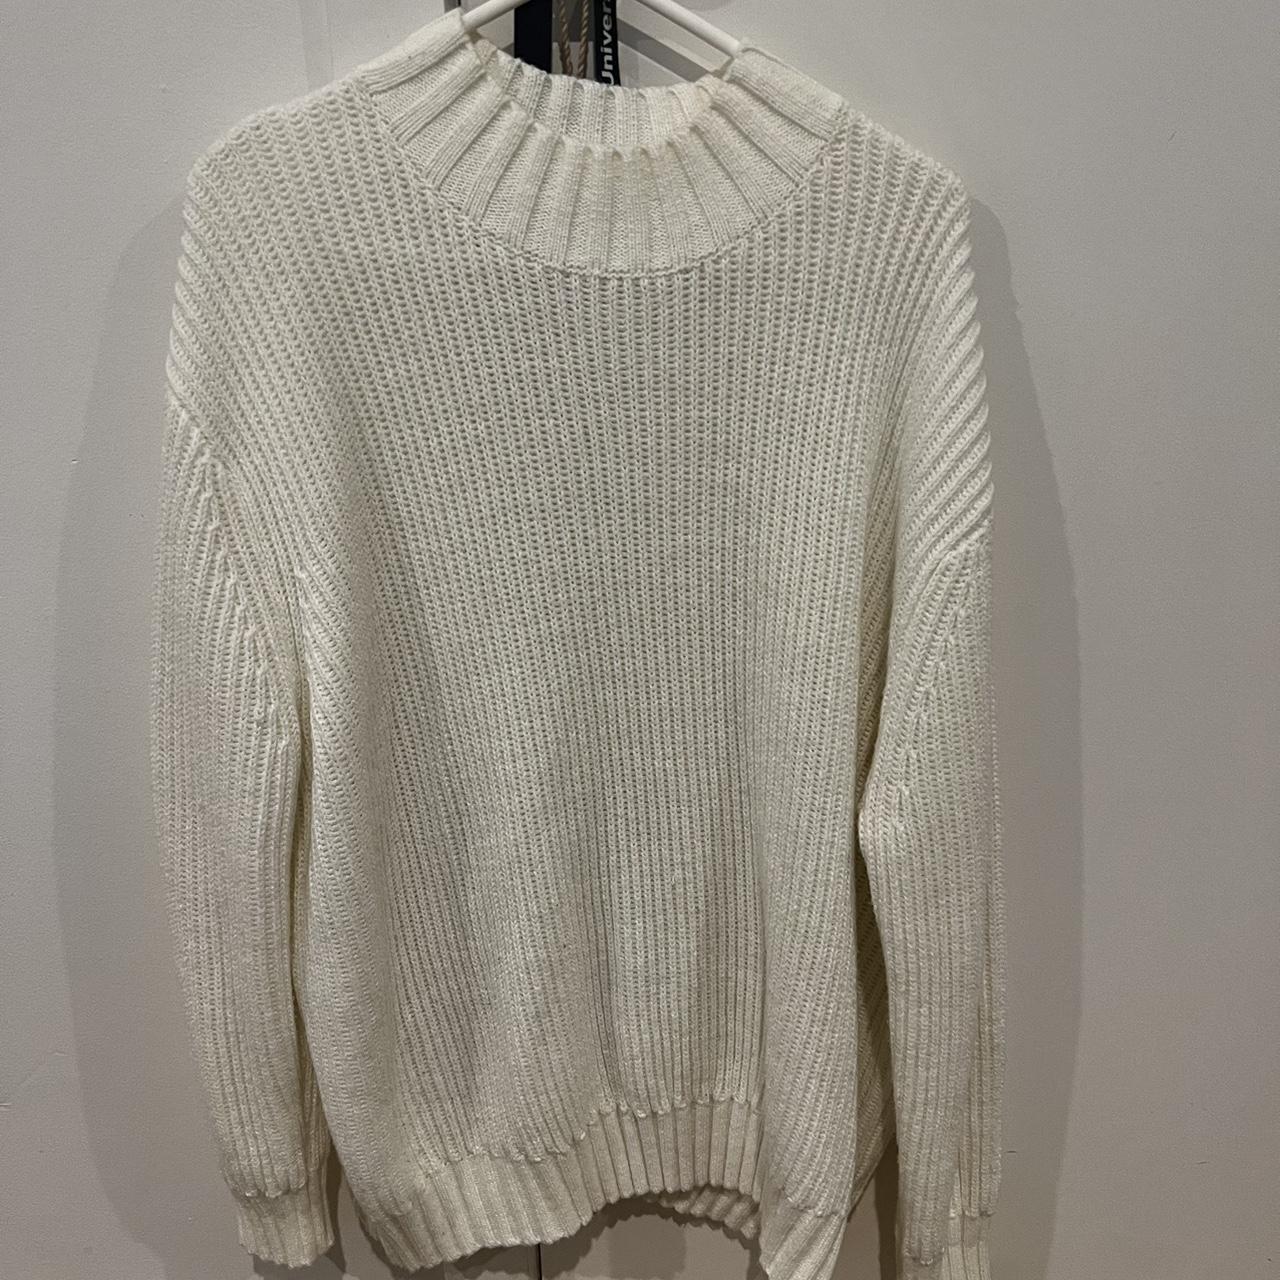 South st country knit sweater - sample in WHITE... - Depop